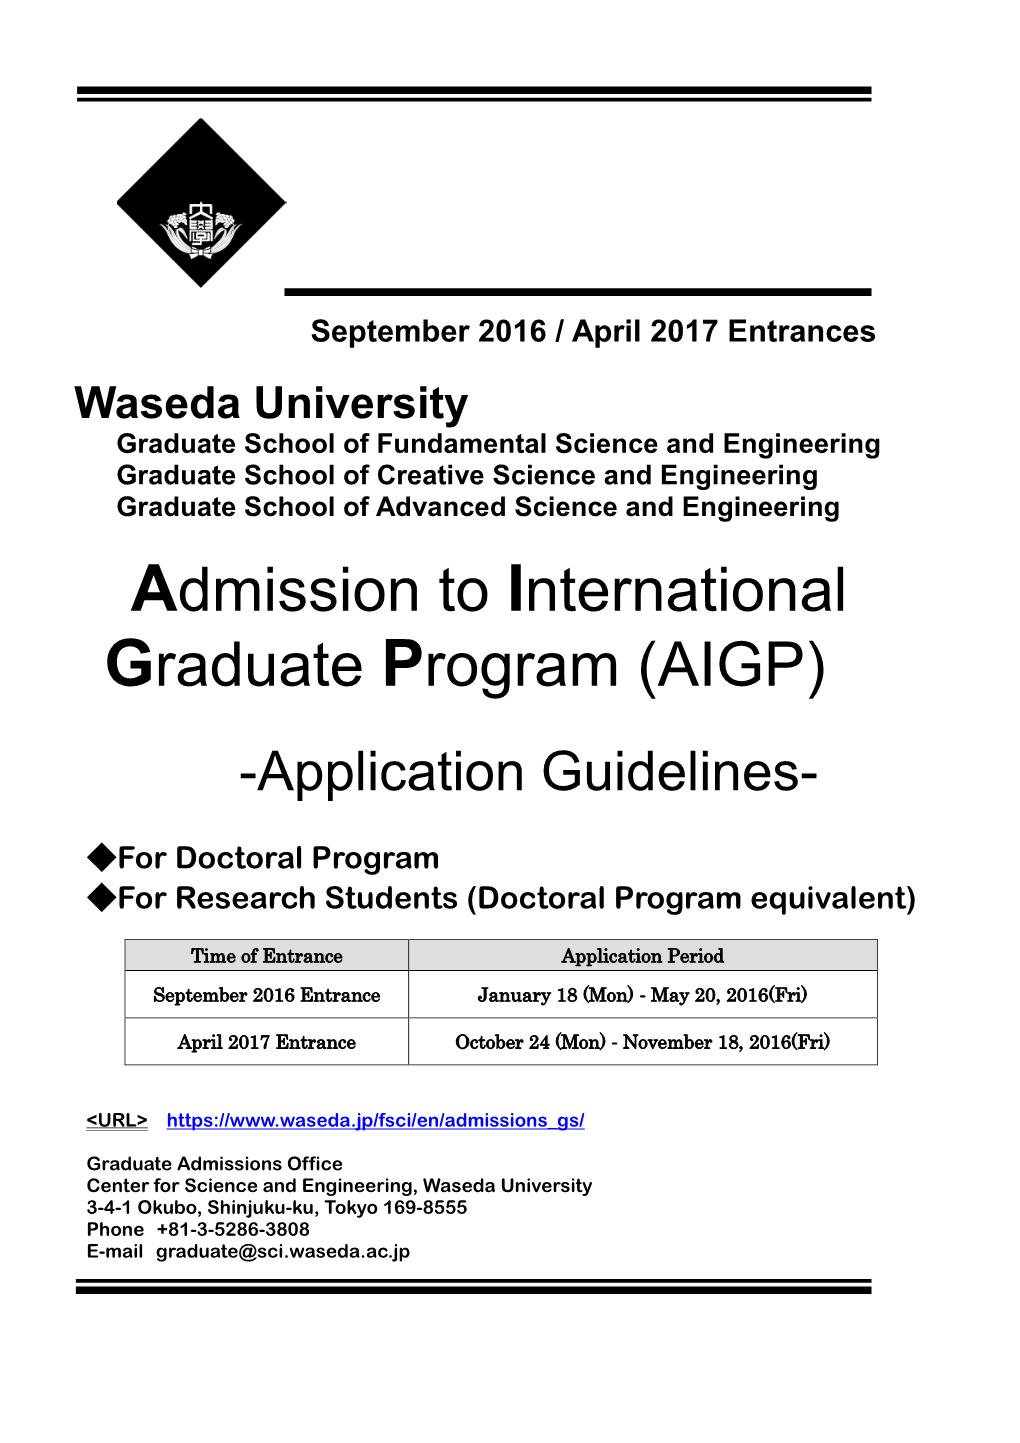 Admission to International Graduate Program (AIGP) -Application Guidelines